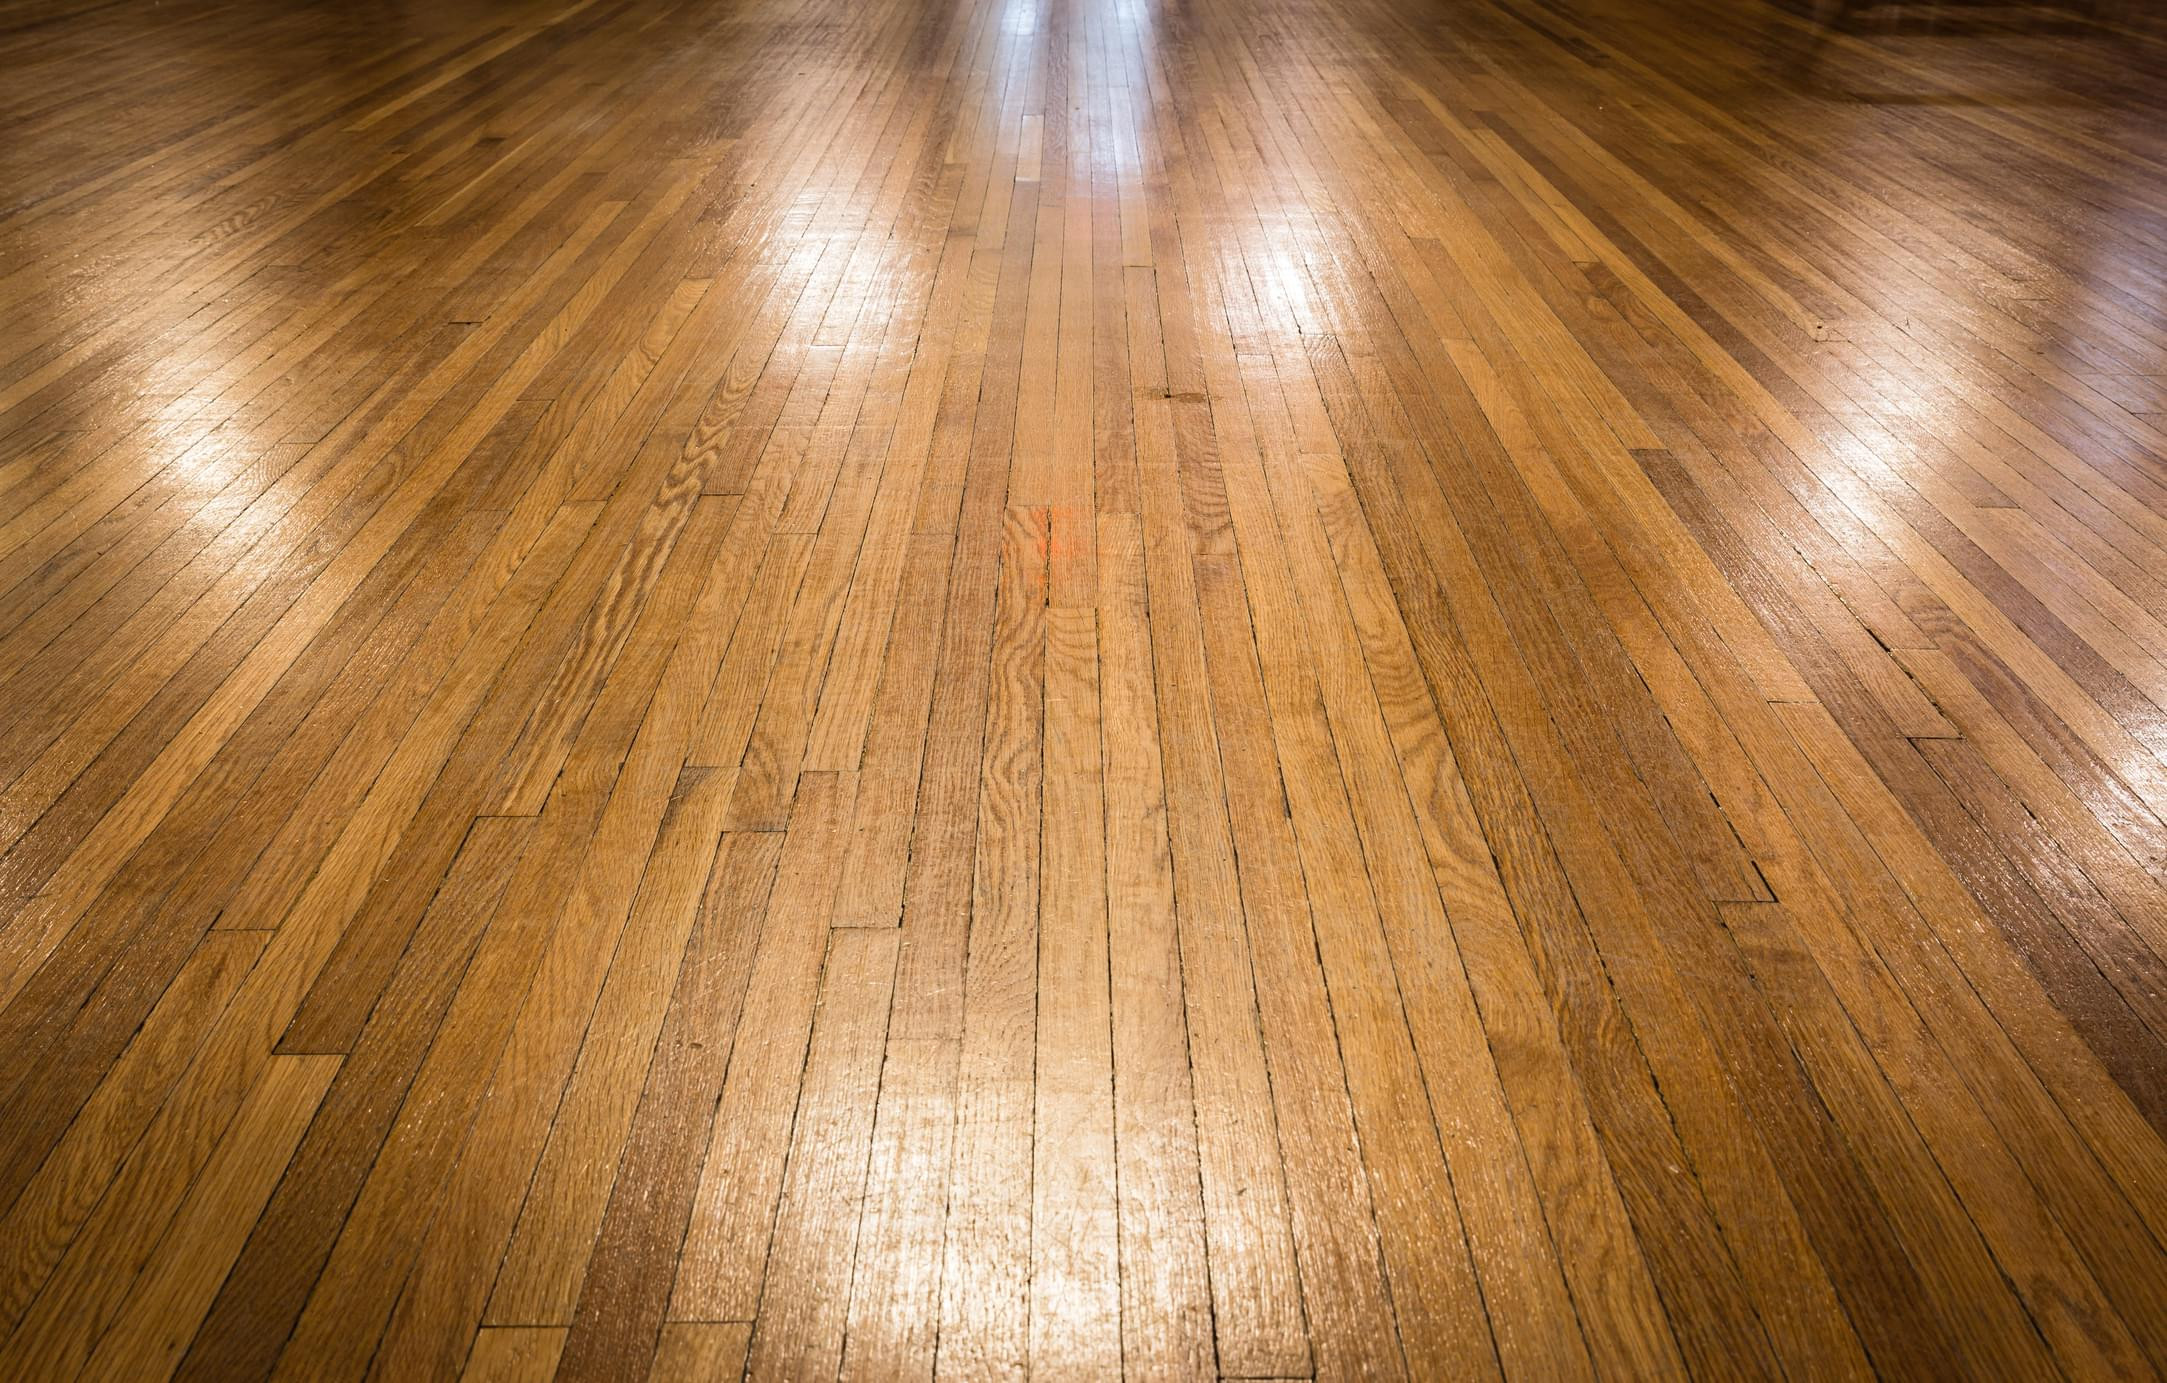 hardwood flooring square foot price of downriver carpet flooring within hardwood request your free in home estimate no high pressure sales no strings attached